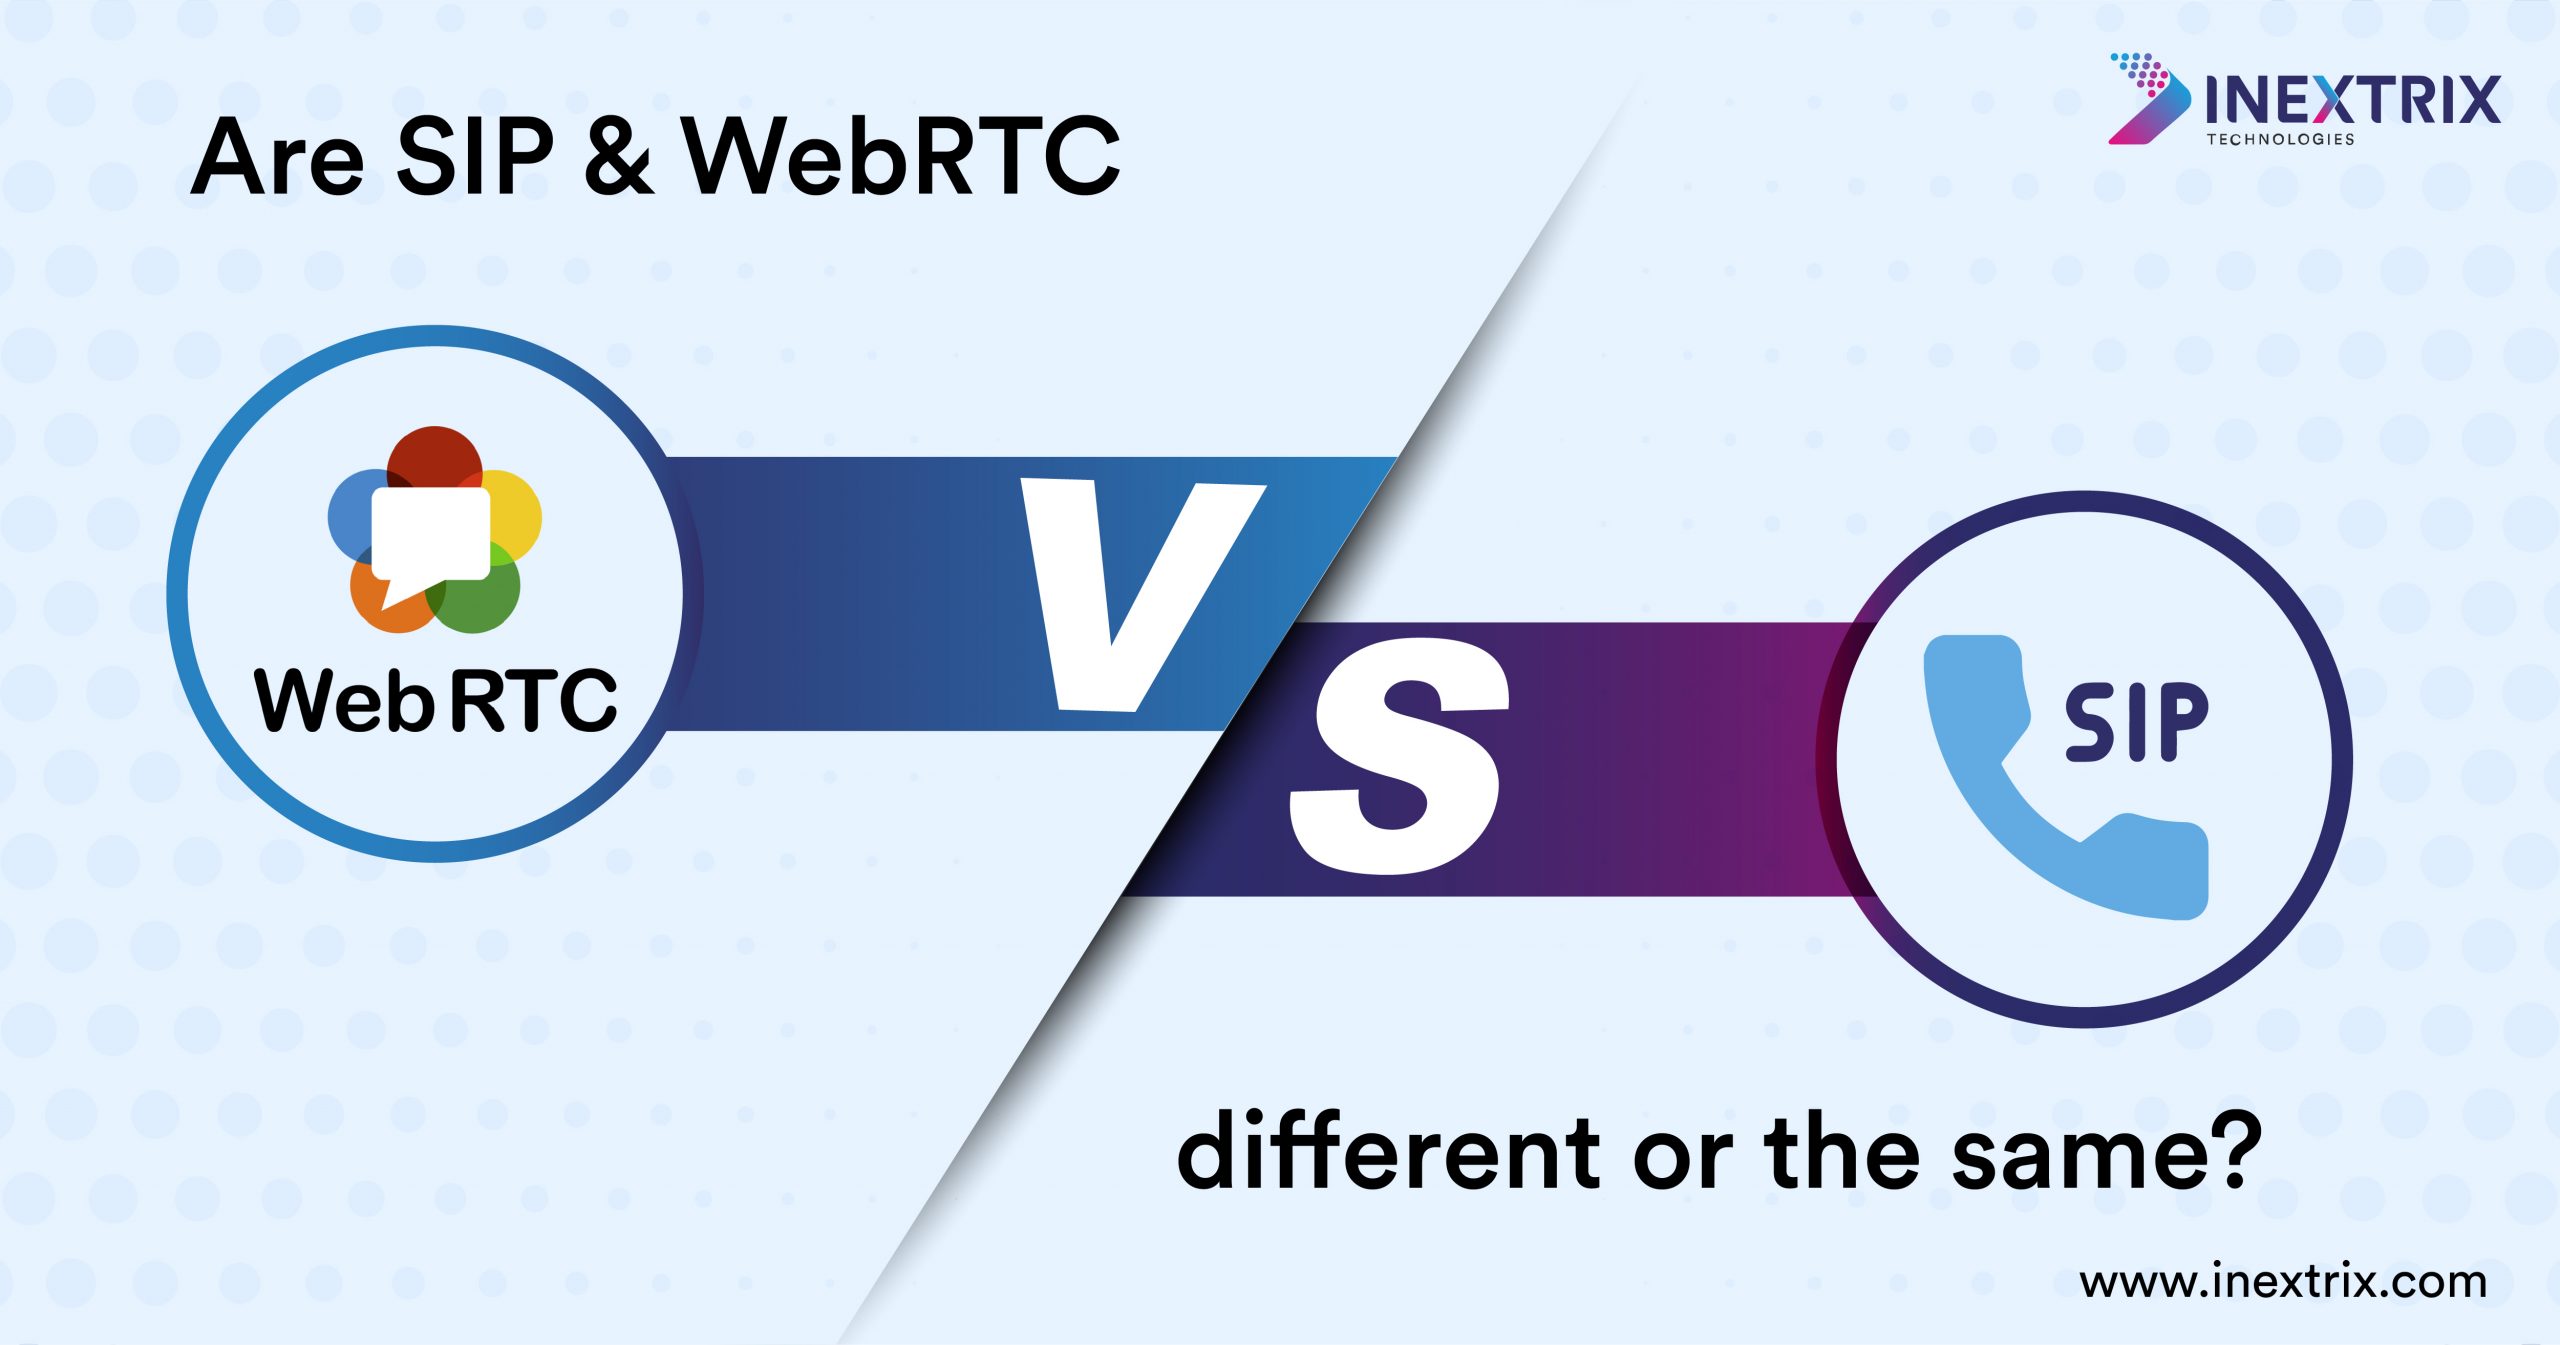 Are SIP and WebRTC different or the same